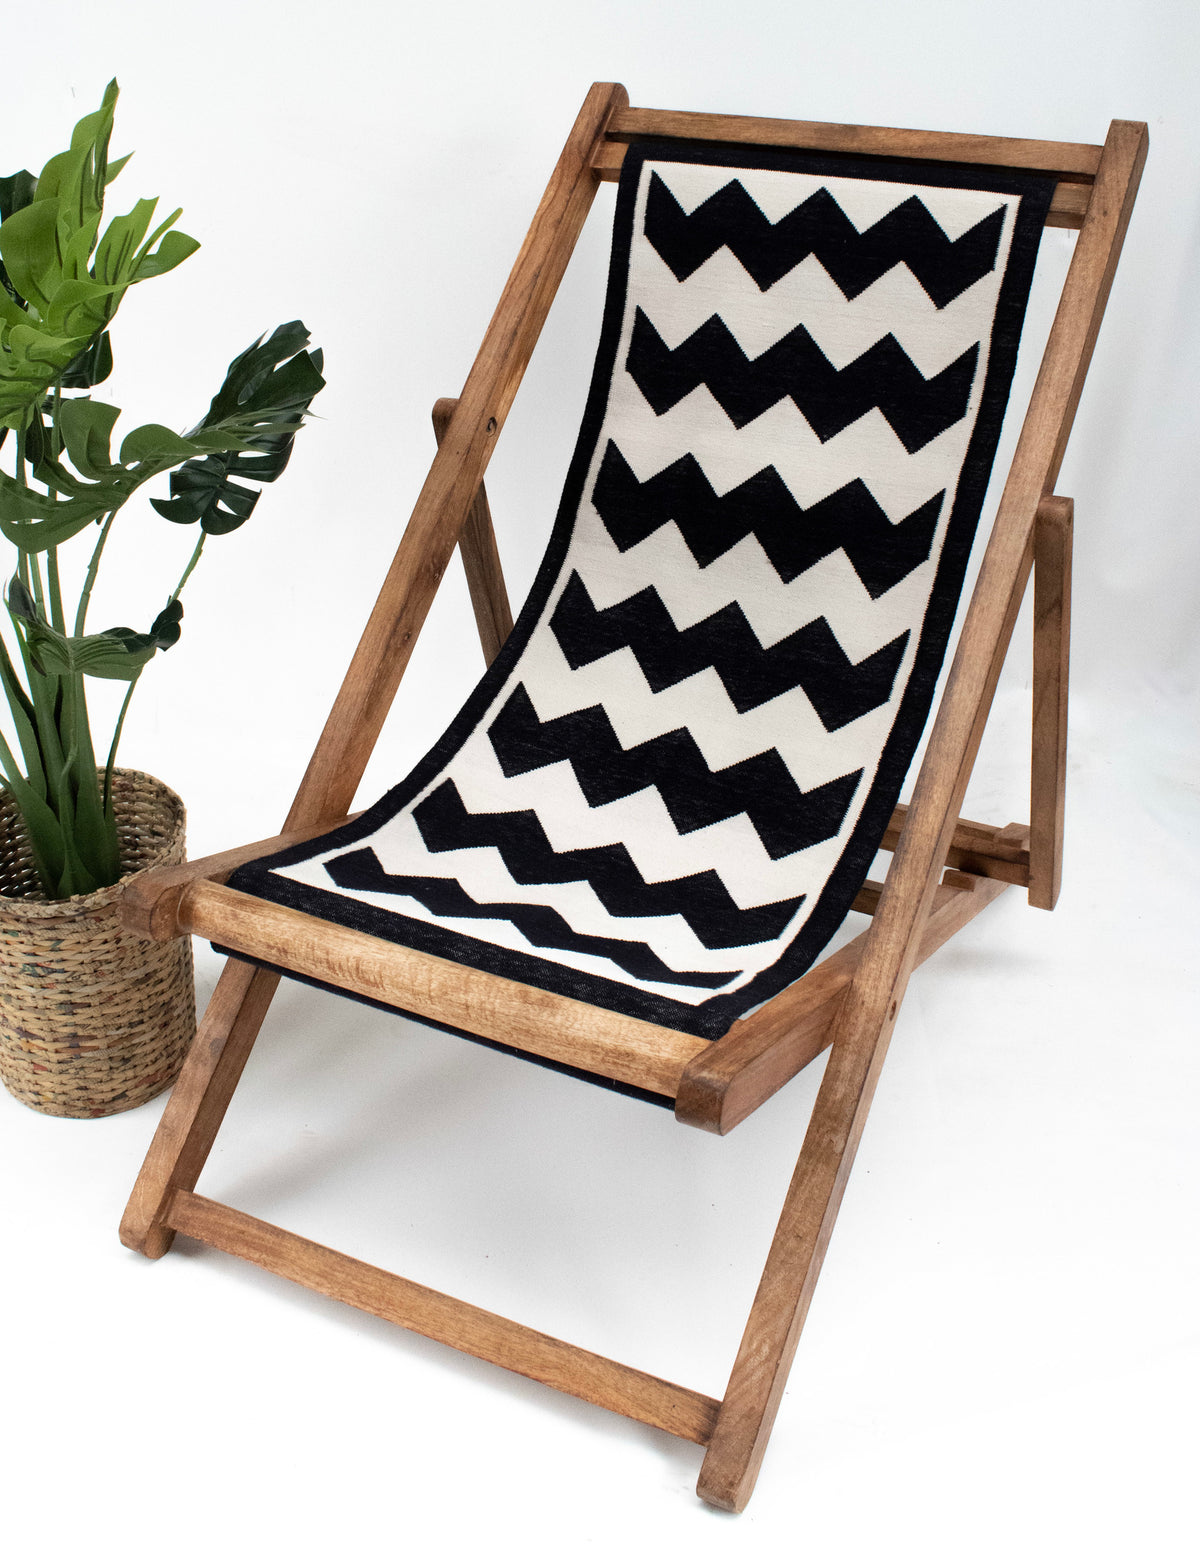 Sling Chair - Rustic Warm Finish with Retro Fabric Seat